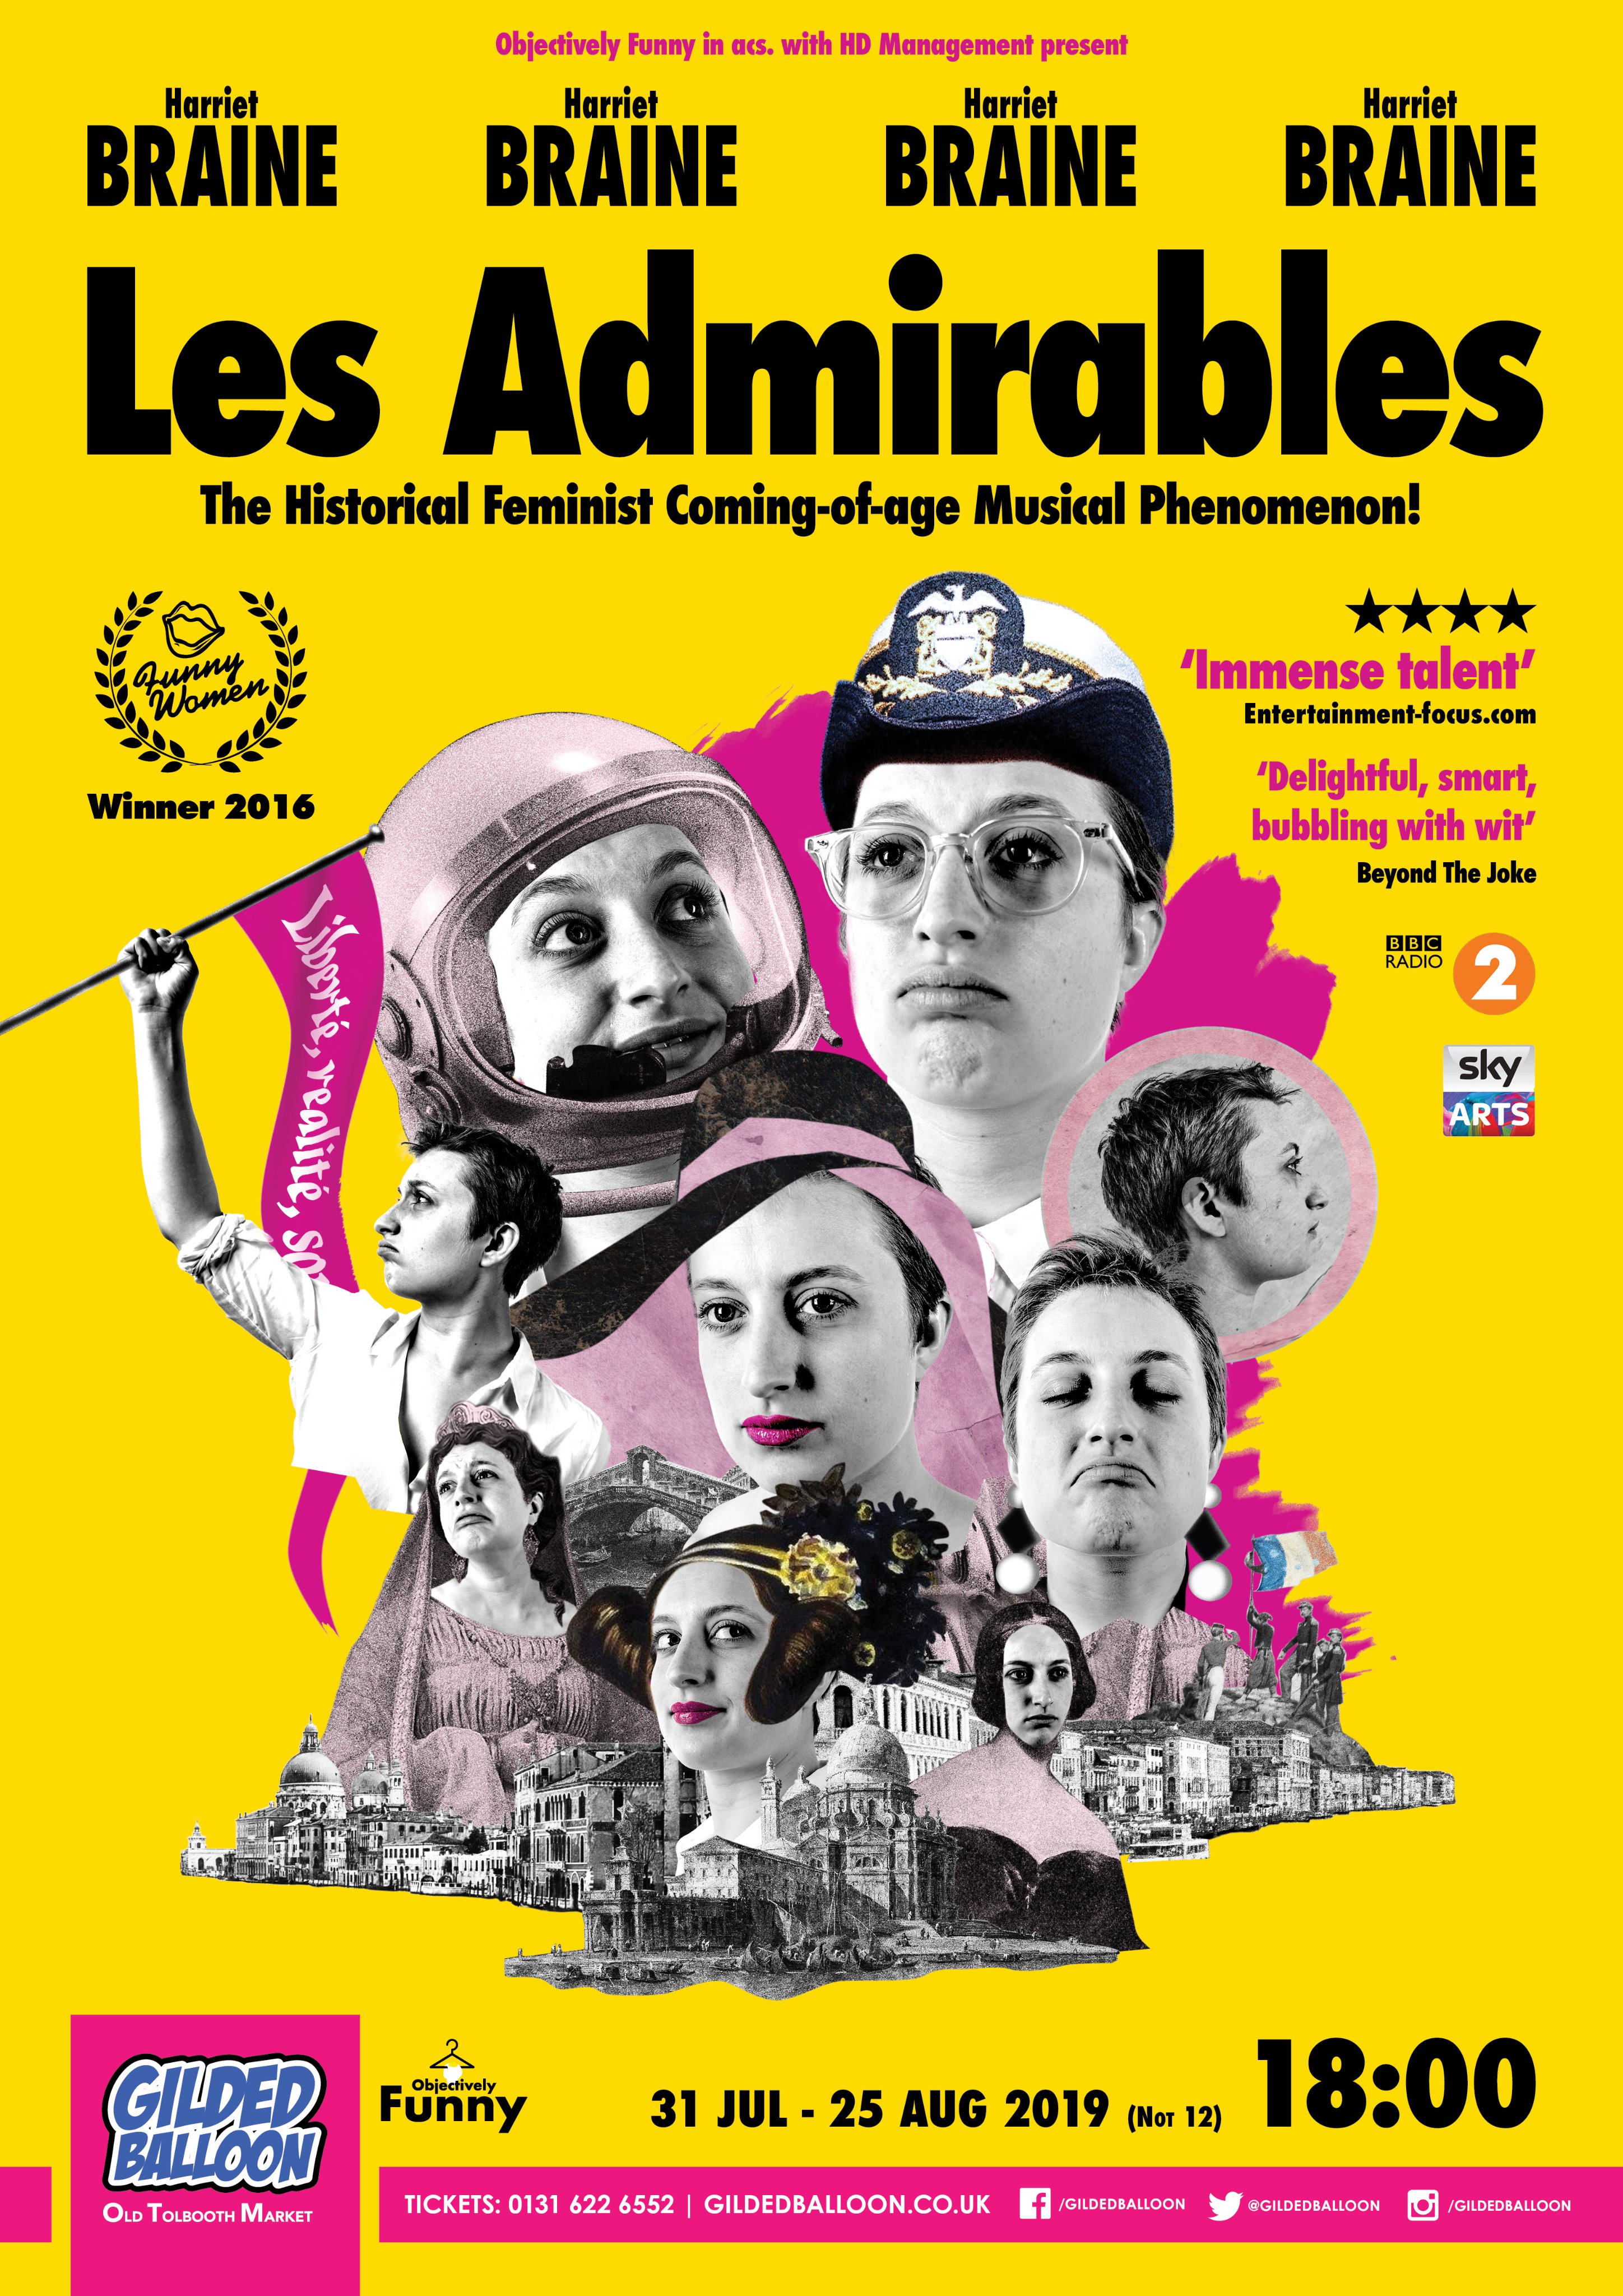 The poster for Harriet Braine: Les Admirables